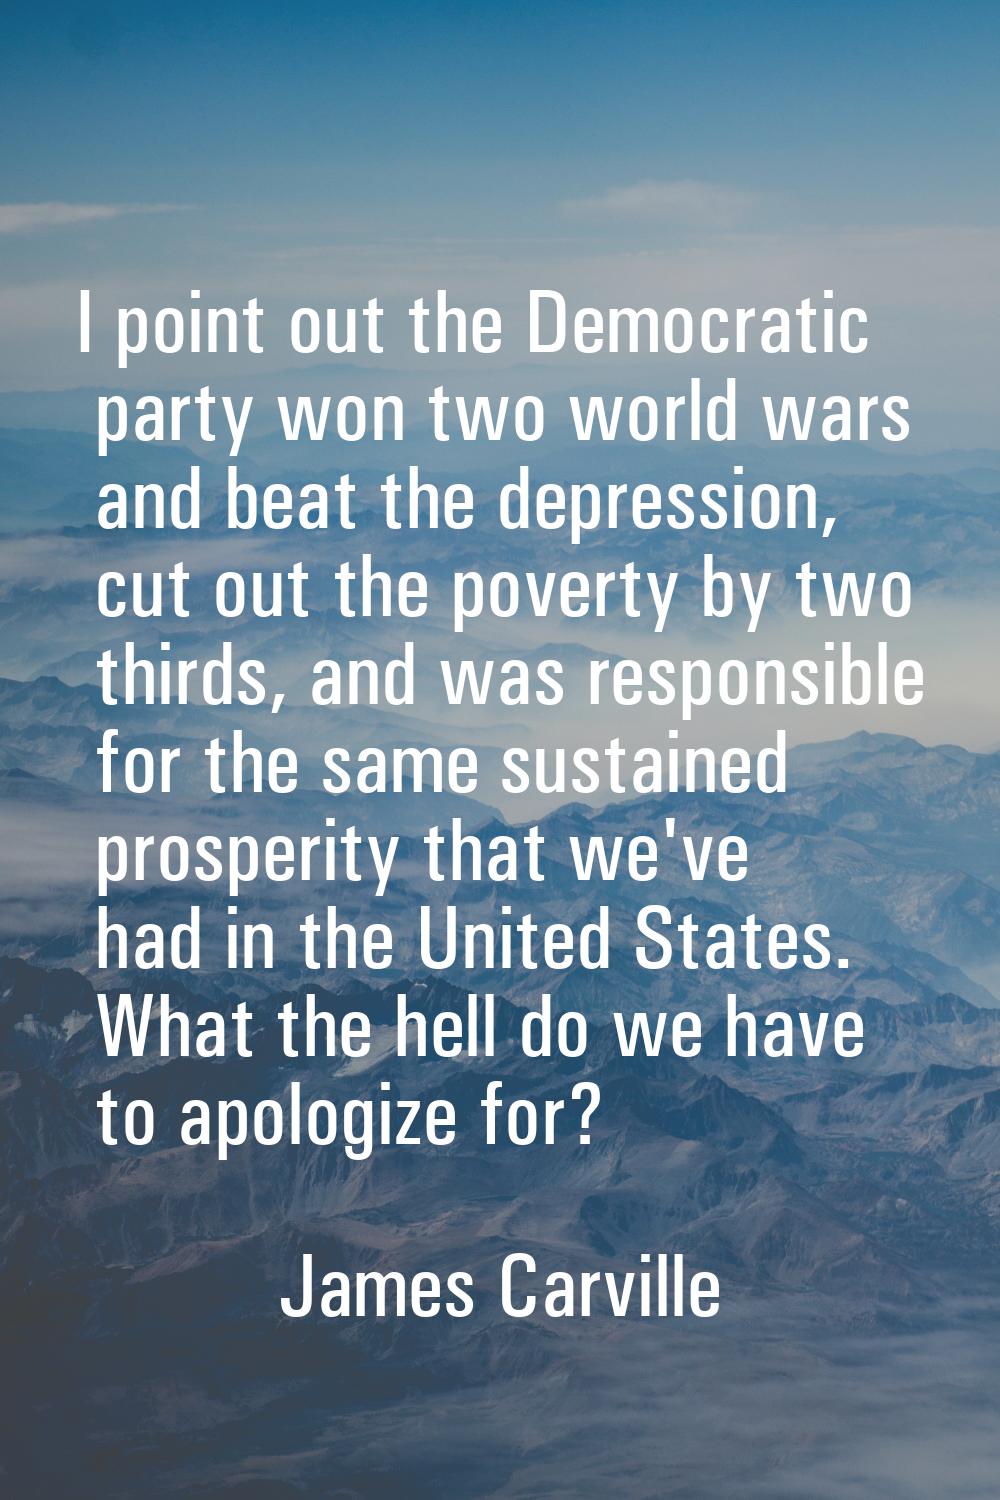 I point out the Democratic party won two world wars and beat the depression, cut out the poverty by